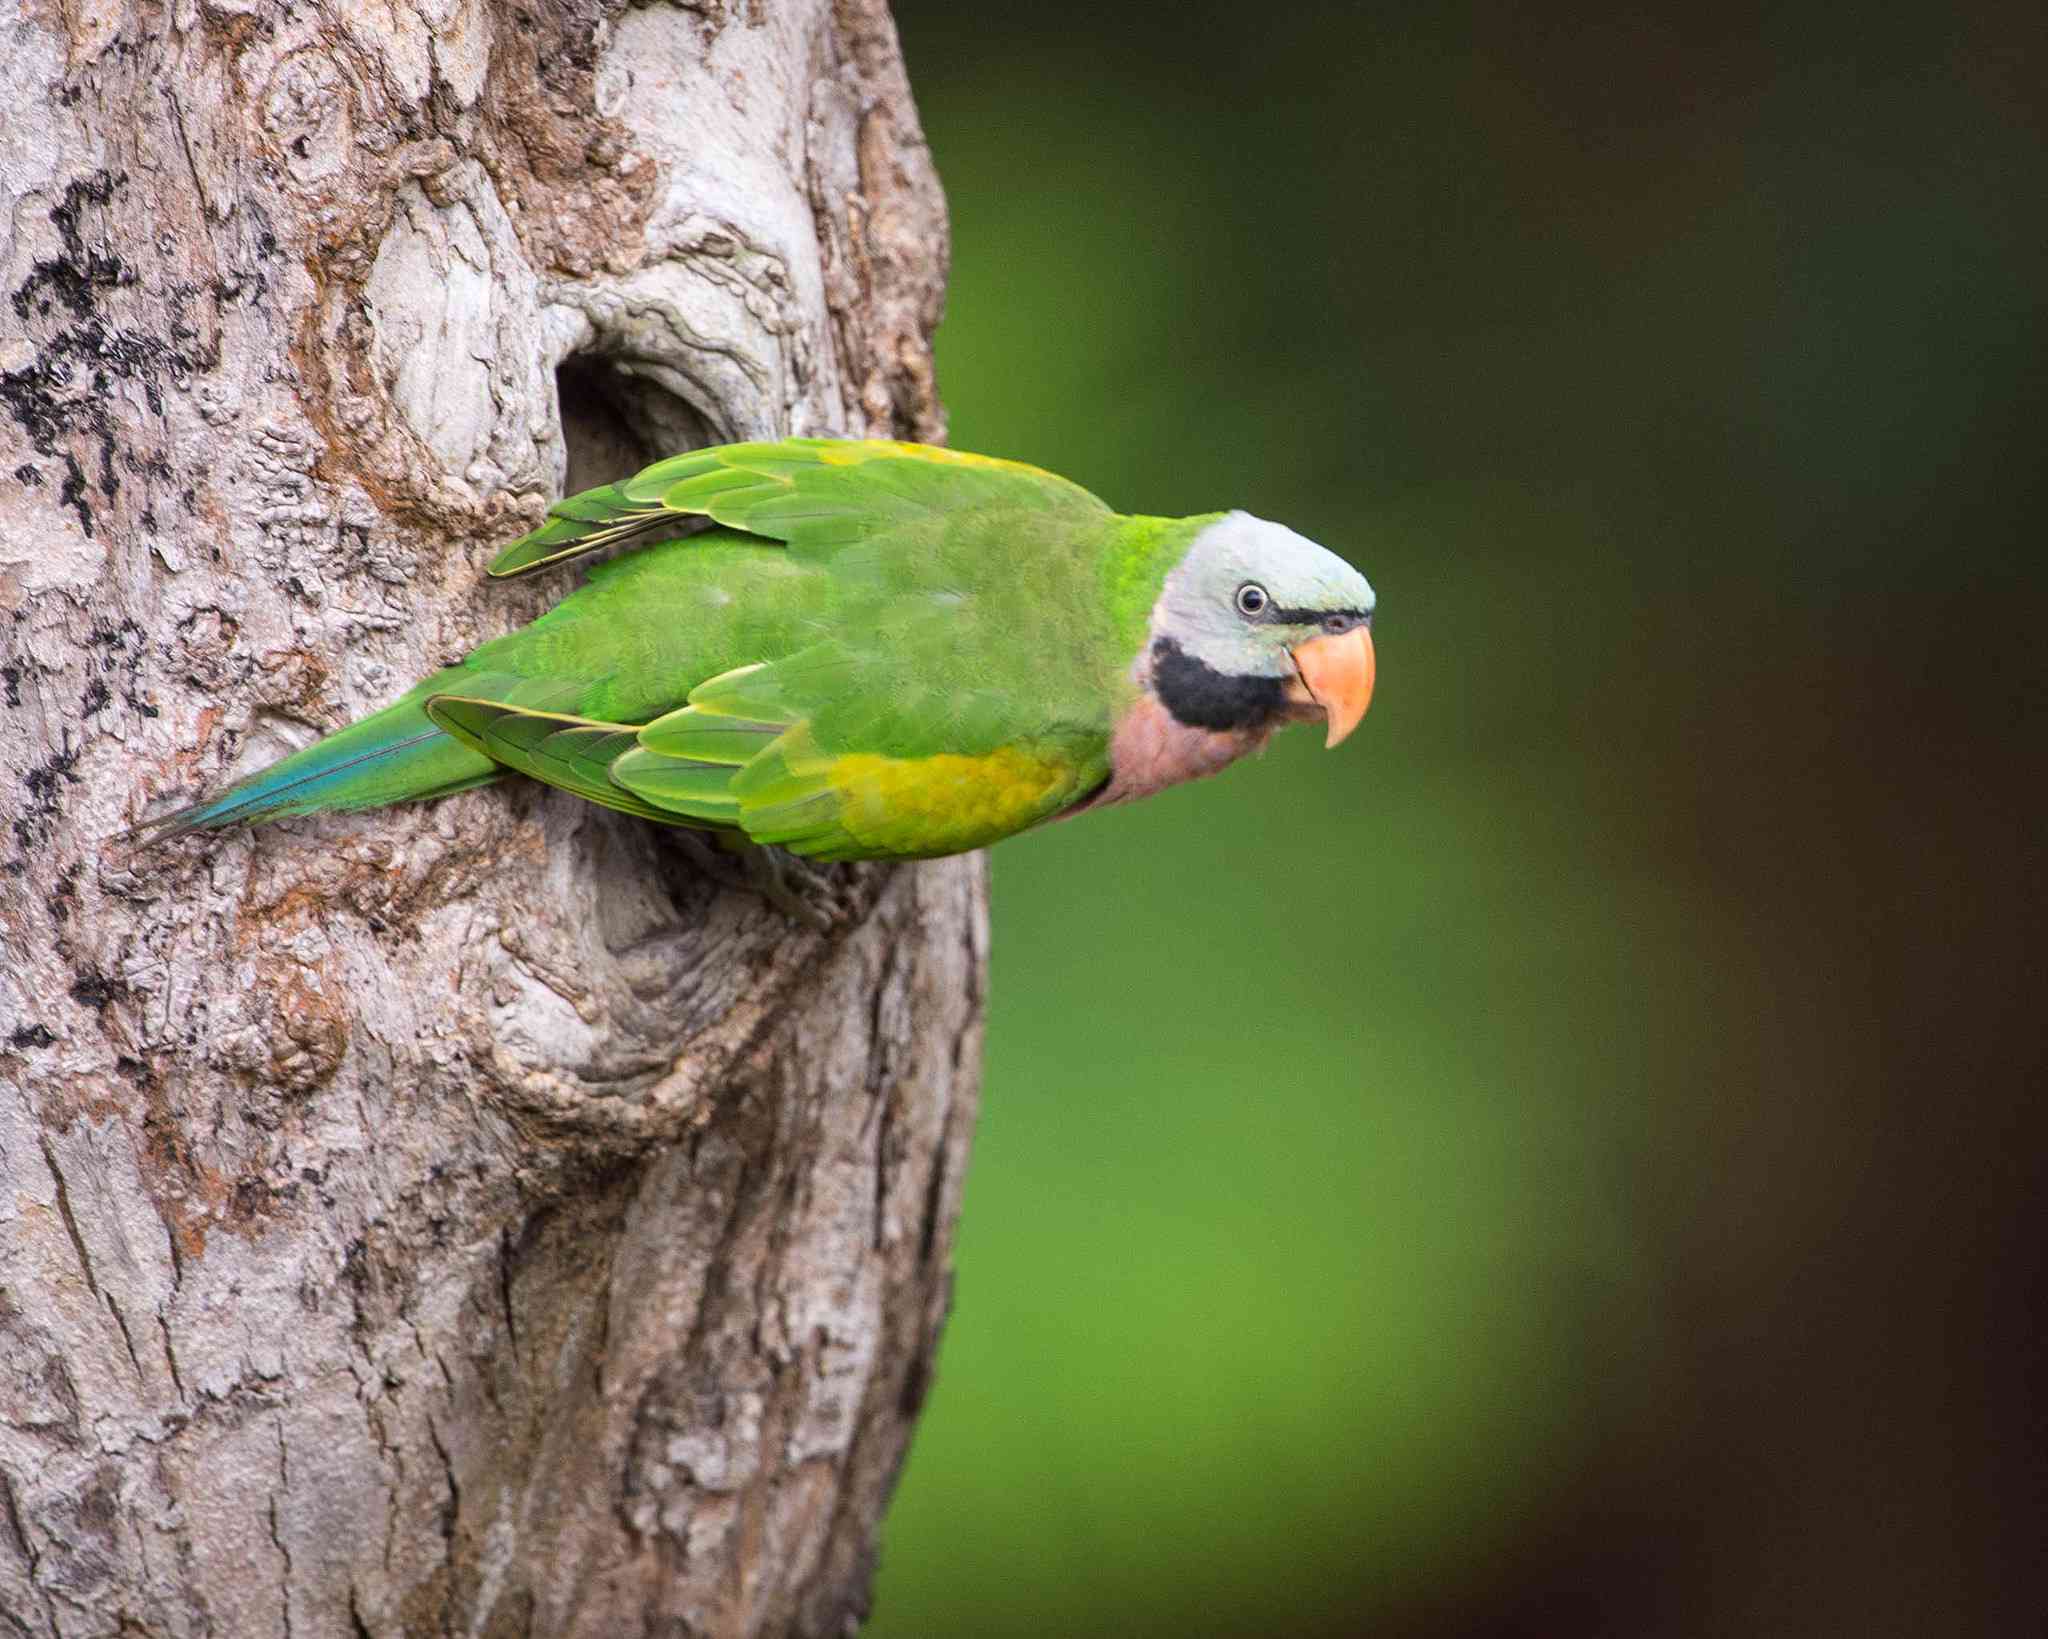 Red-breasted parakeet on tree